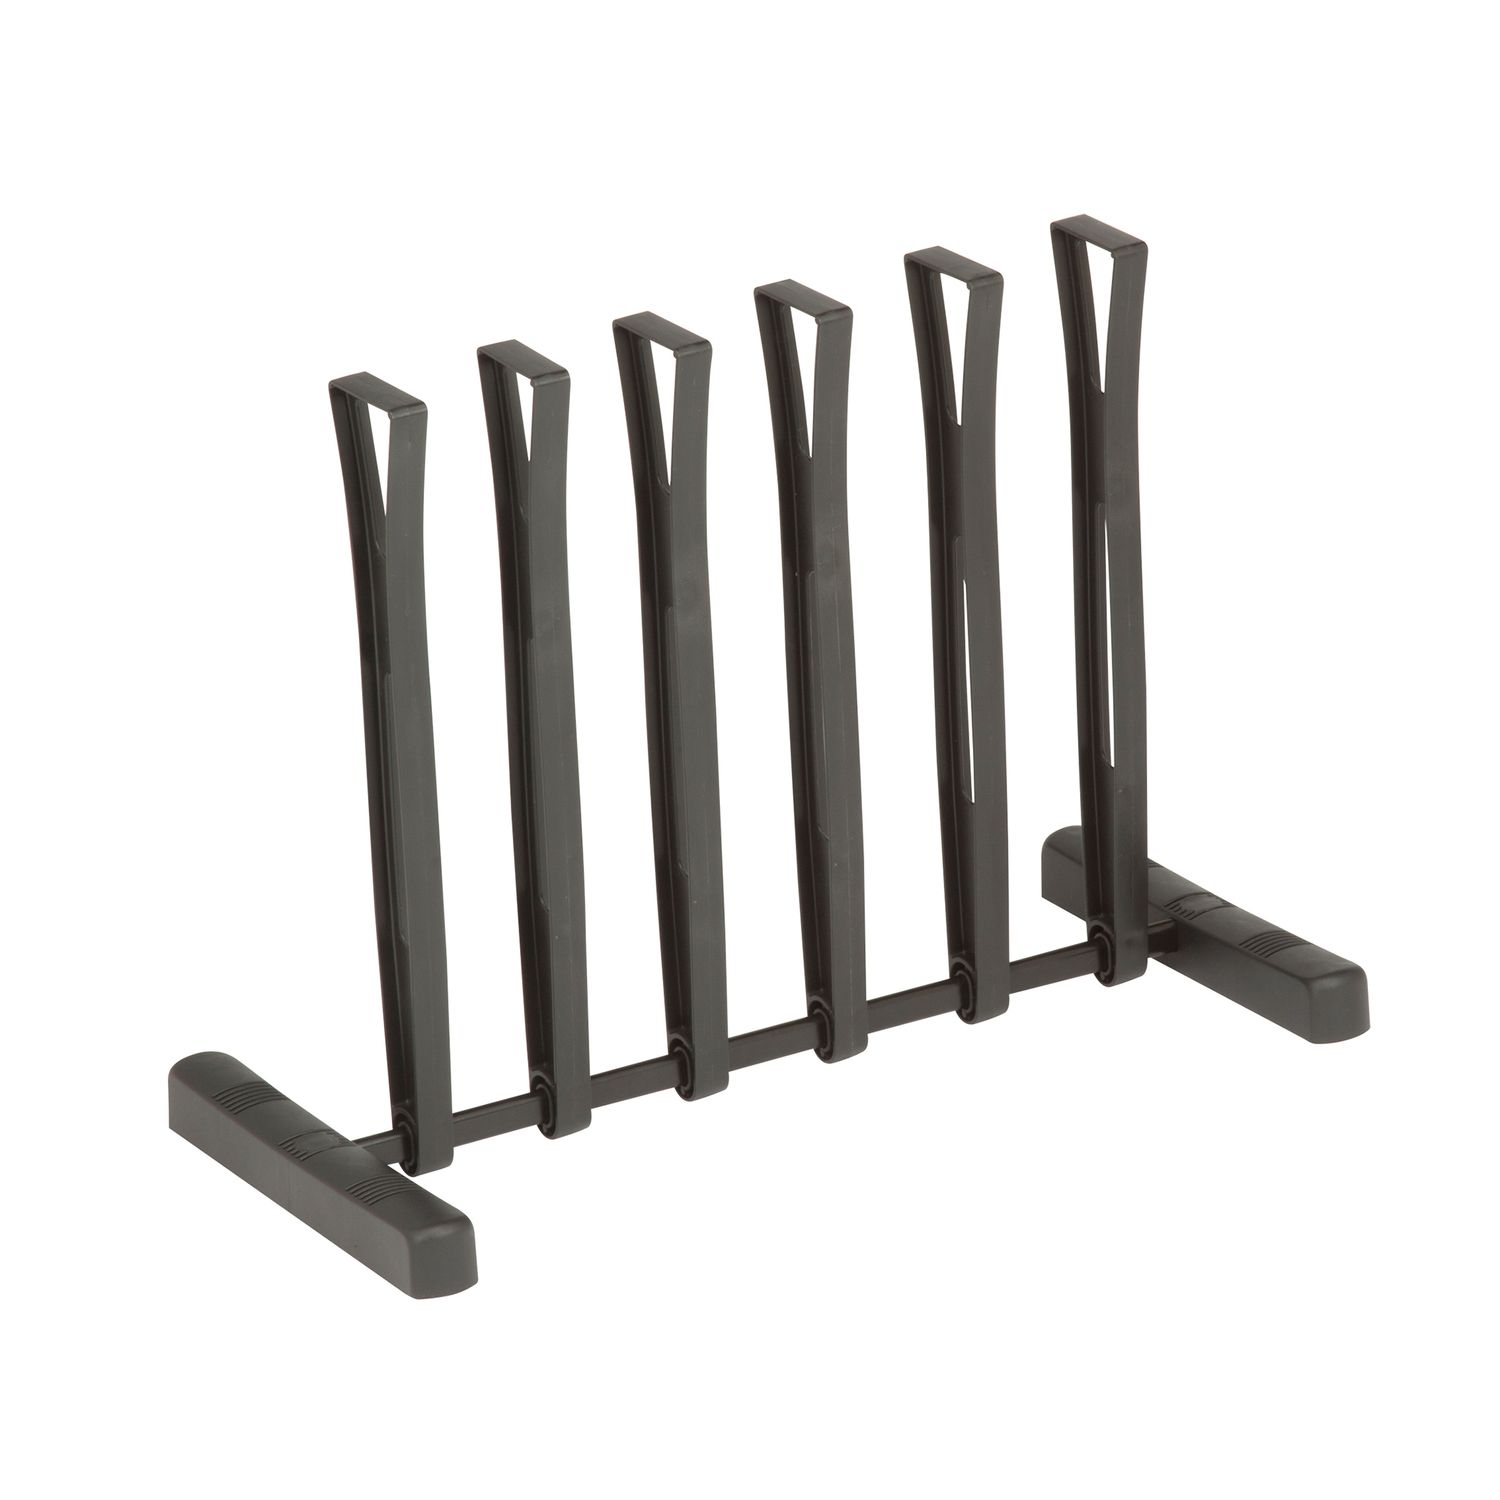 Image for Honey-Can-Do 3-Pair Boot Holder at Kohl's.